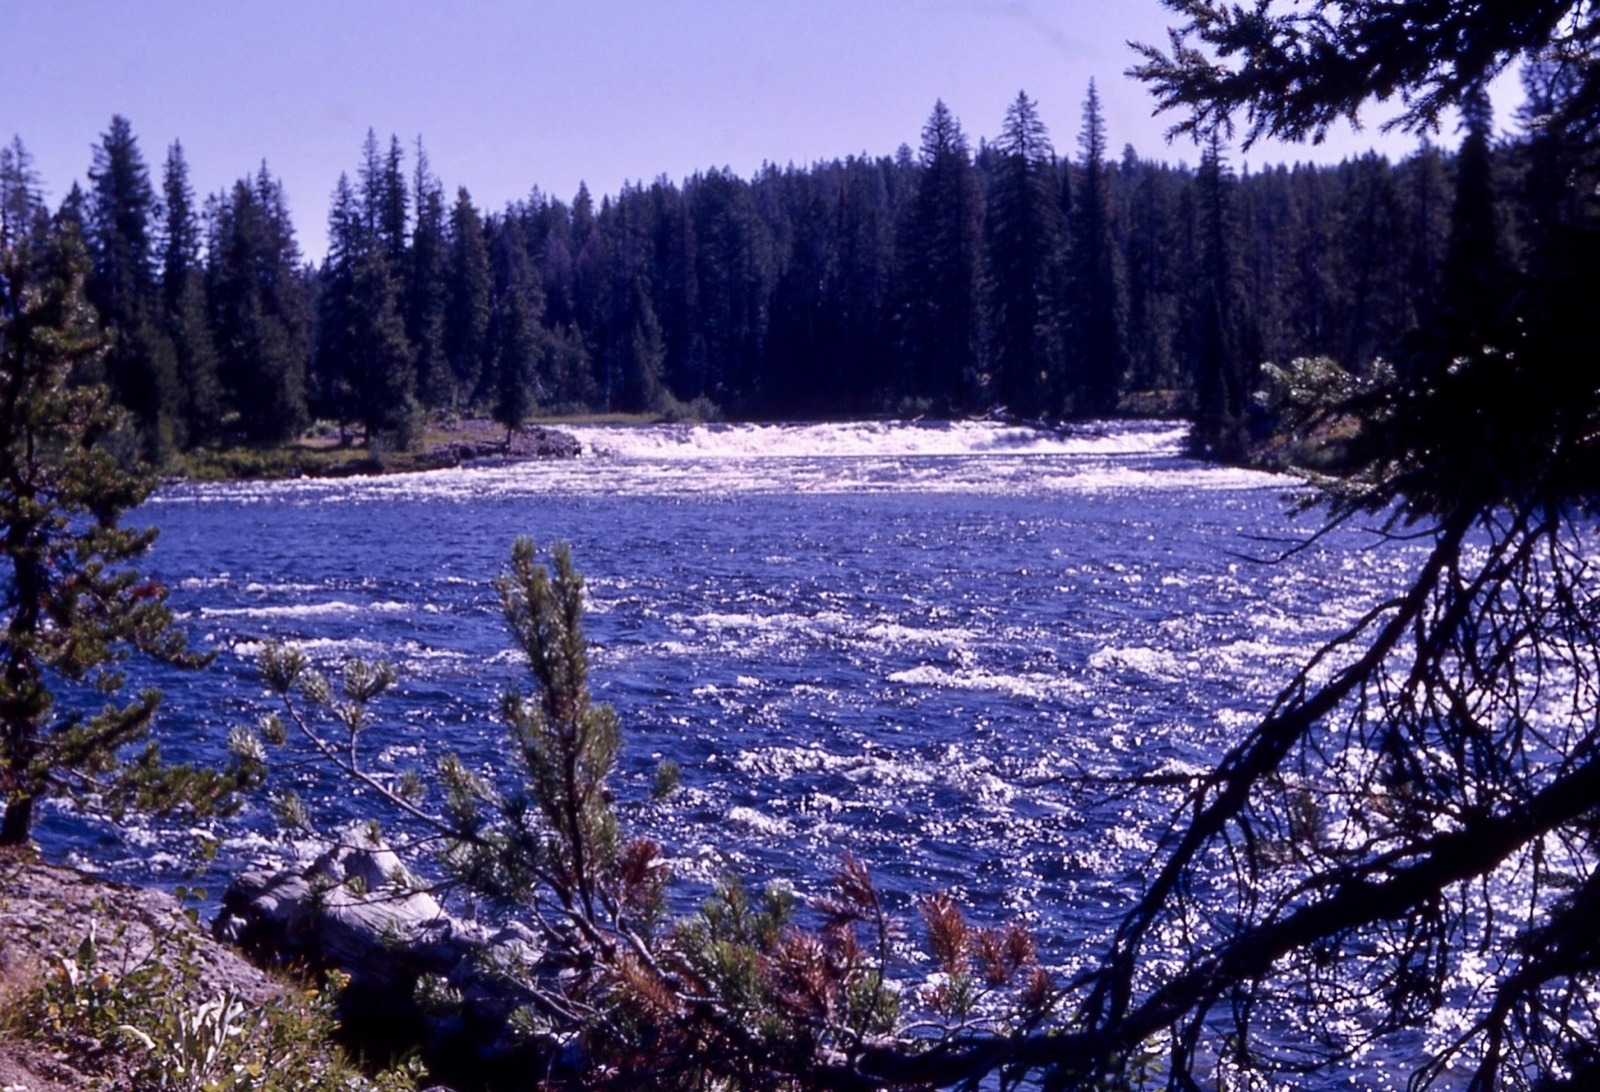 In the 1920s, farmers and irrigators in Idaho worked to muster support from the U.S. Department of Interior to build a dam and impoundment on the Fall River, pictured here, to give them more water for growing crops.  It would have come at a huge ecological cost to the southwest corner of Yellowstone, also known as the &quot;Cascade Corner&quot; because of its abundance of waterfalls. It also would have affected wildlife habitat and angling. It was almost built.  Photo courtesy NPS 